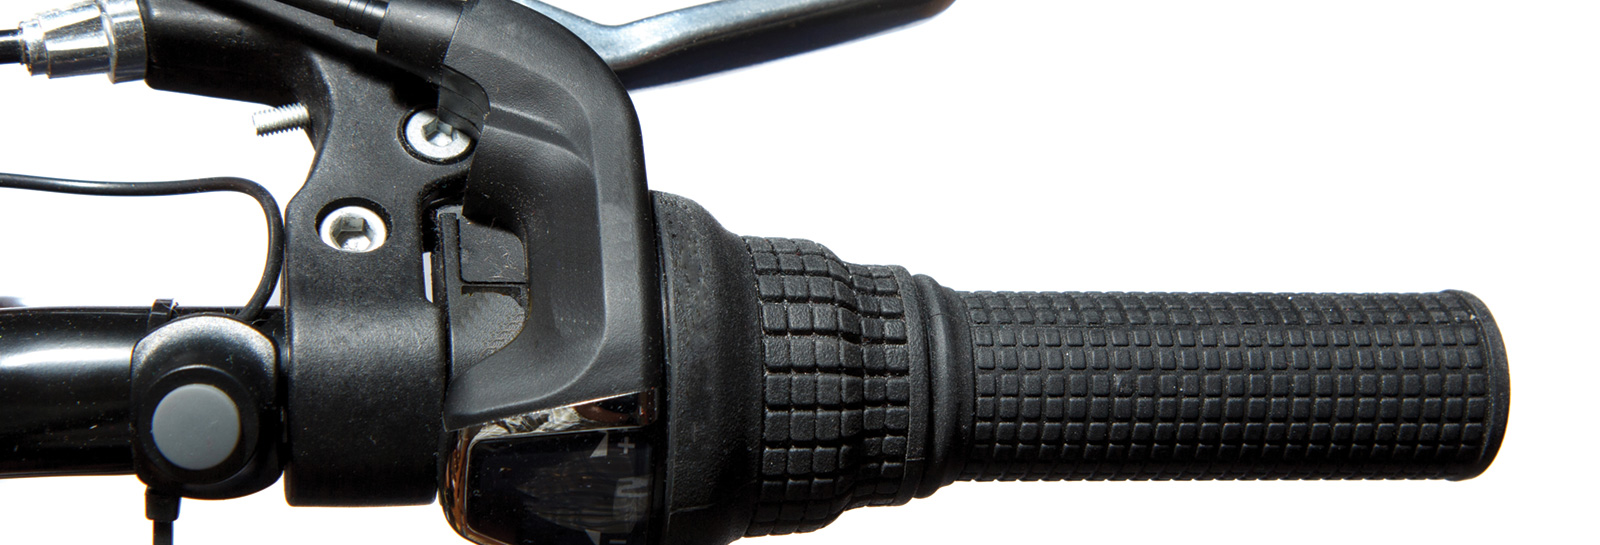 close-up photo of a bicycle handle